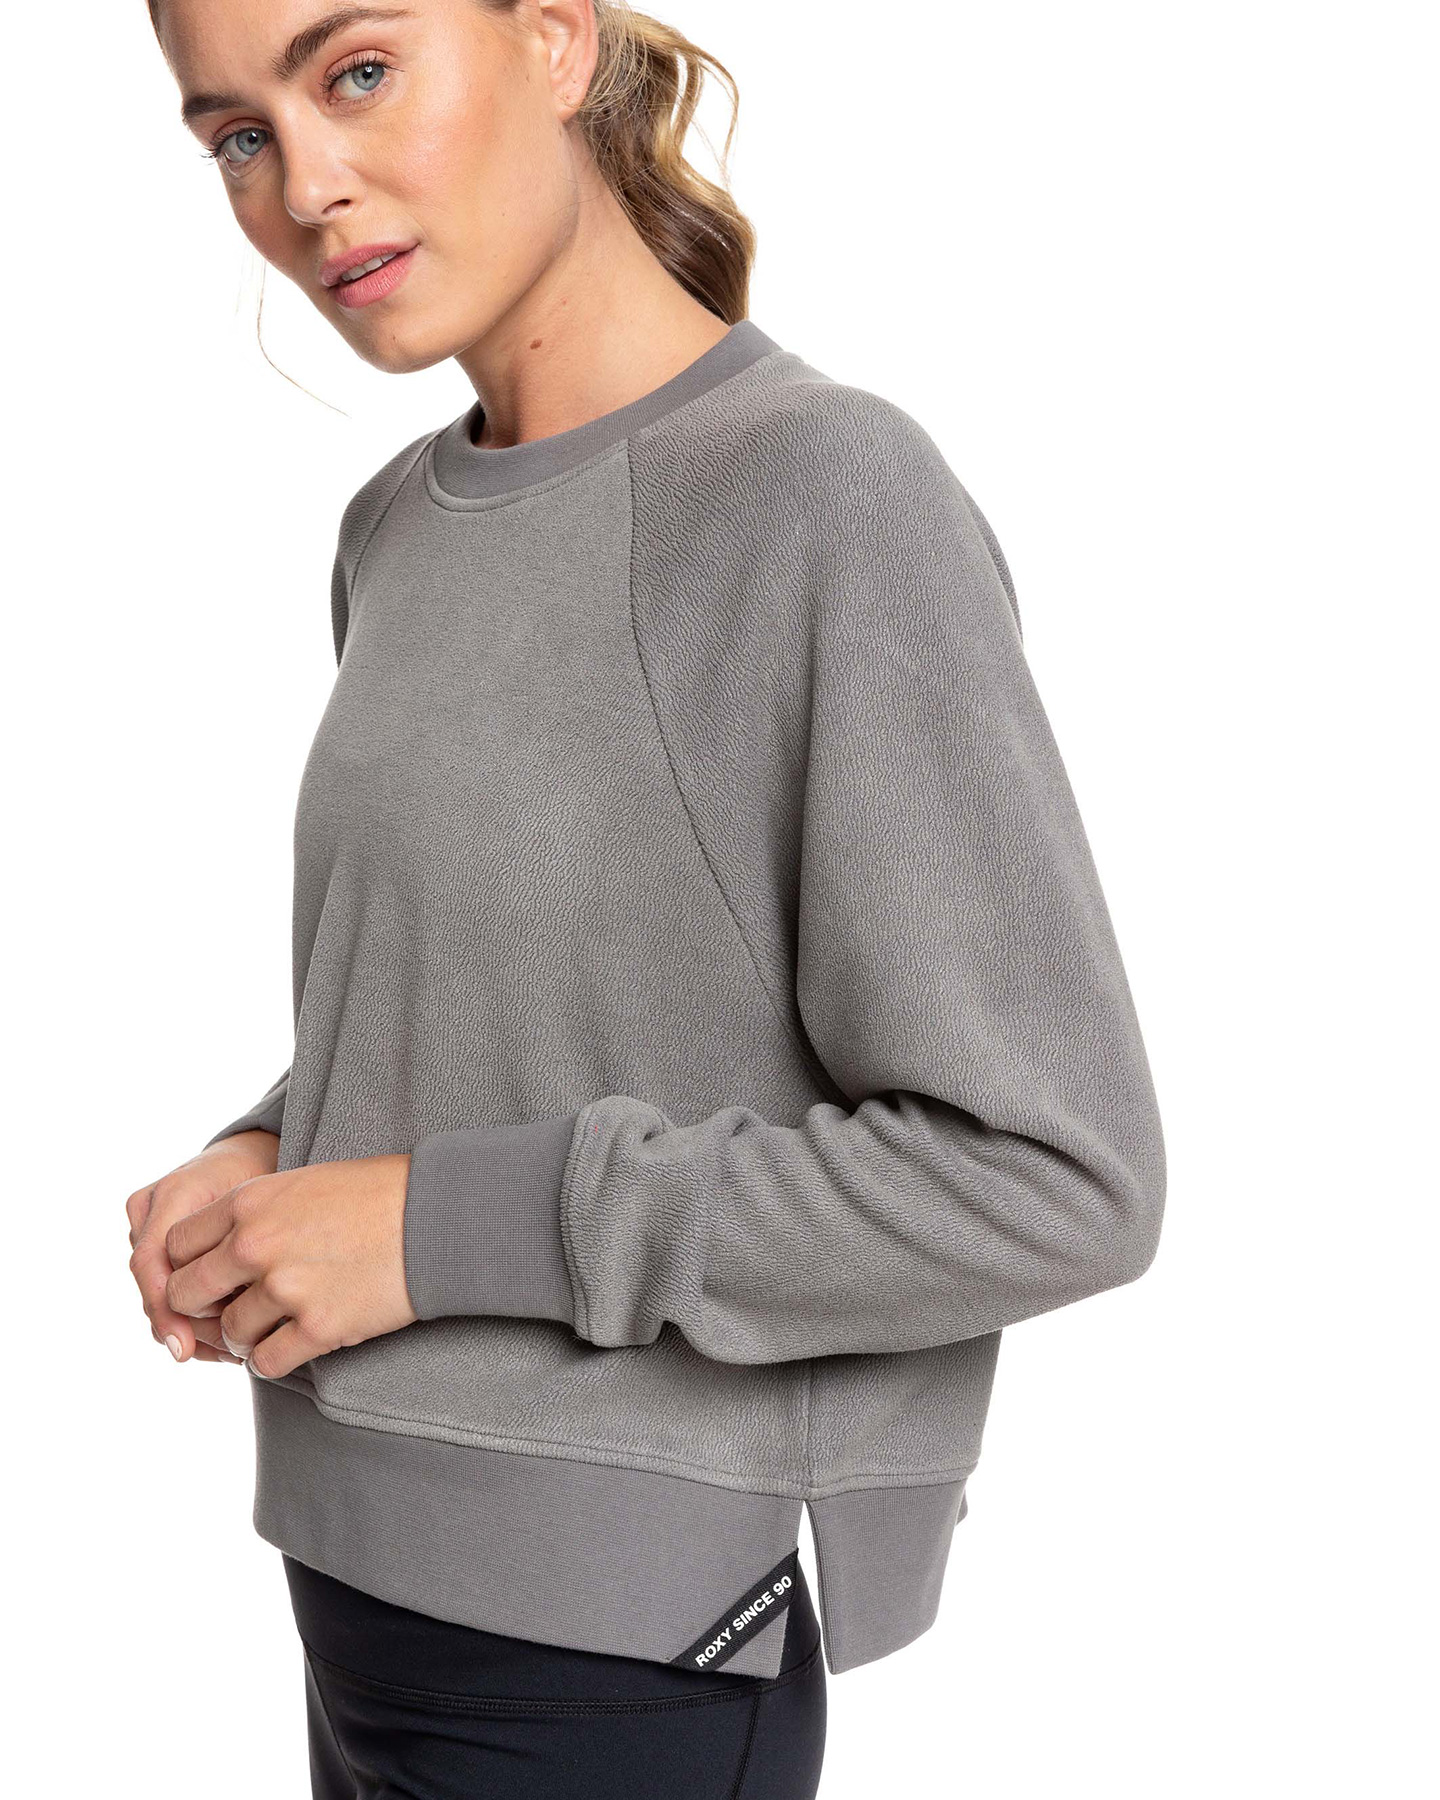 Roxy Womens Instant Crush Cropped Fleece Jumper - Smoked Pearl | SurfStitch